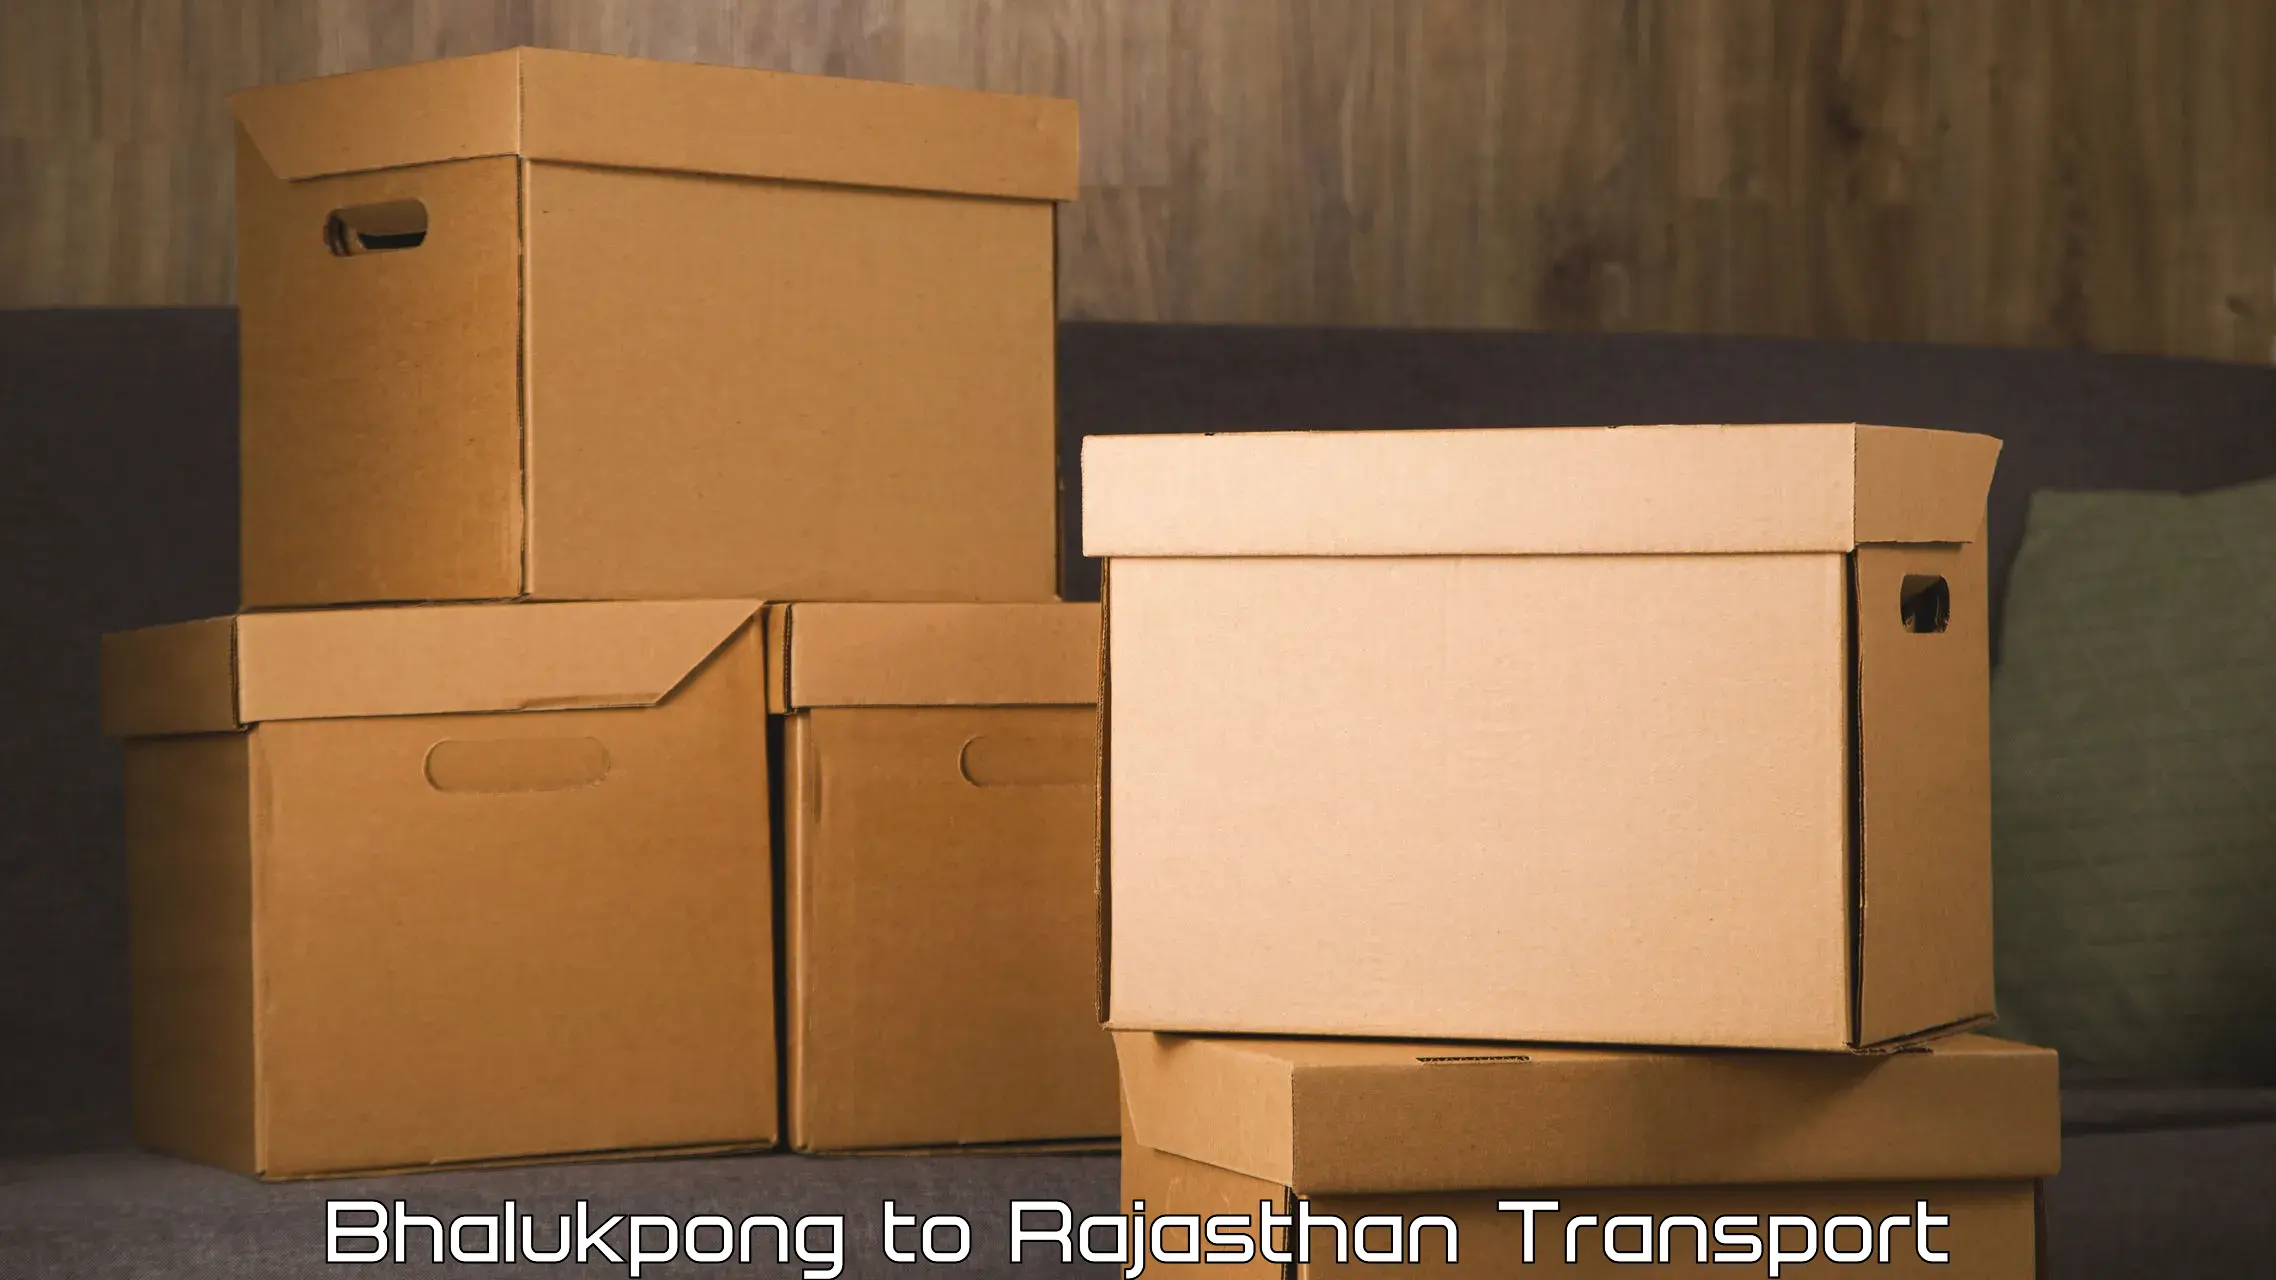 Two wheeler transport services Bhalukpong to Rajasthan